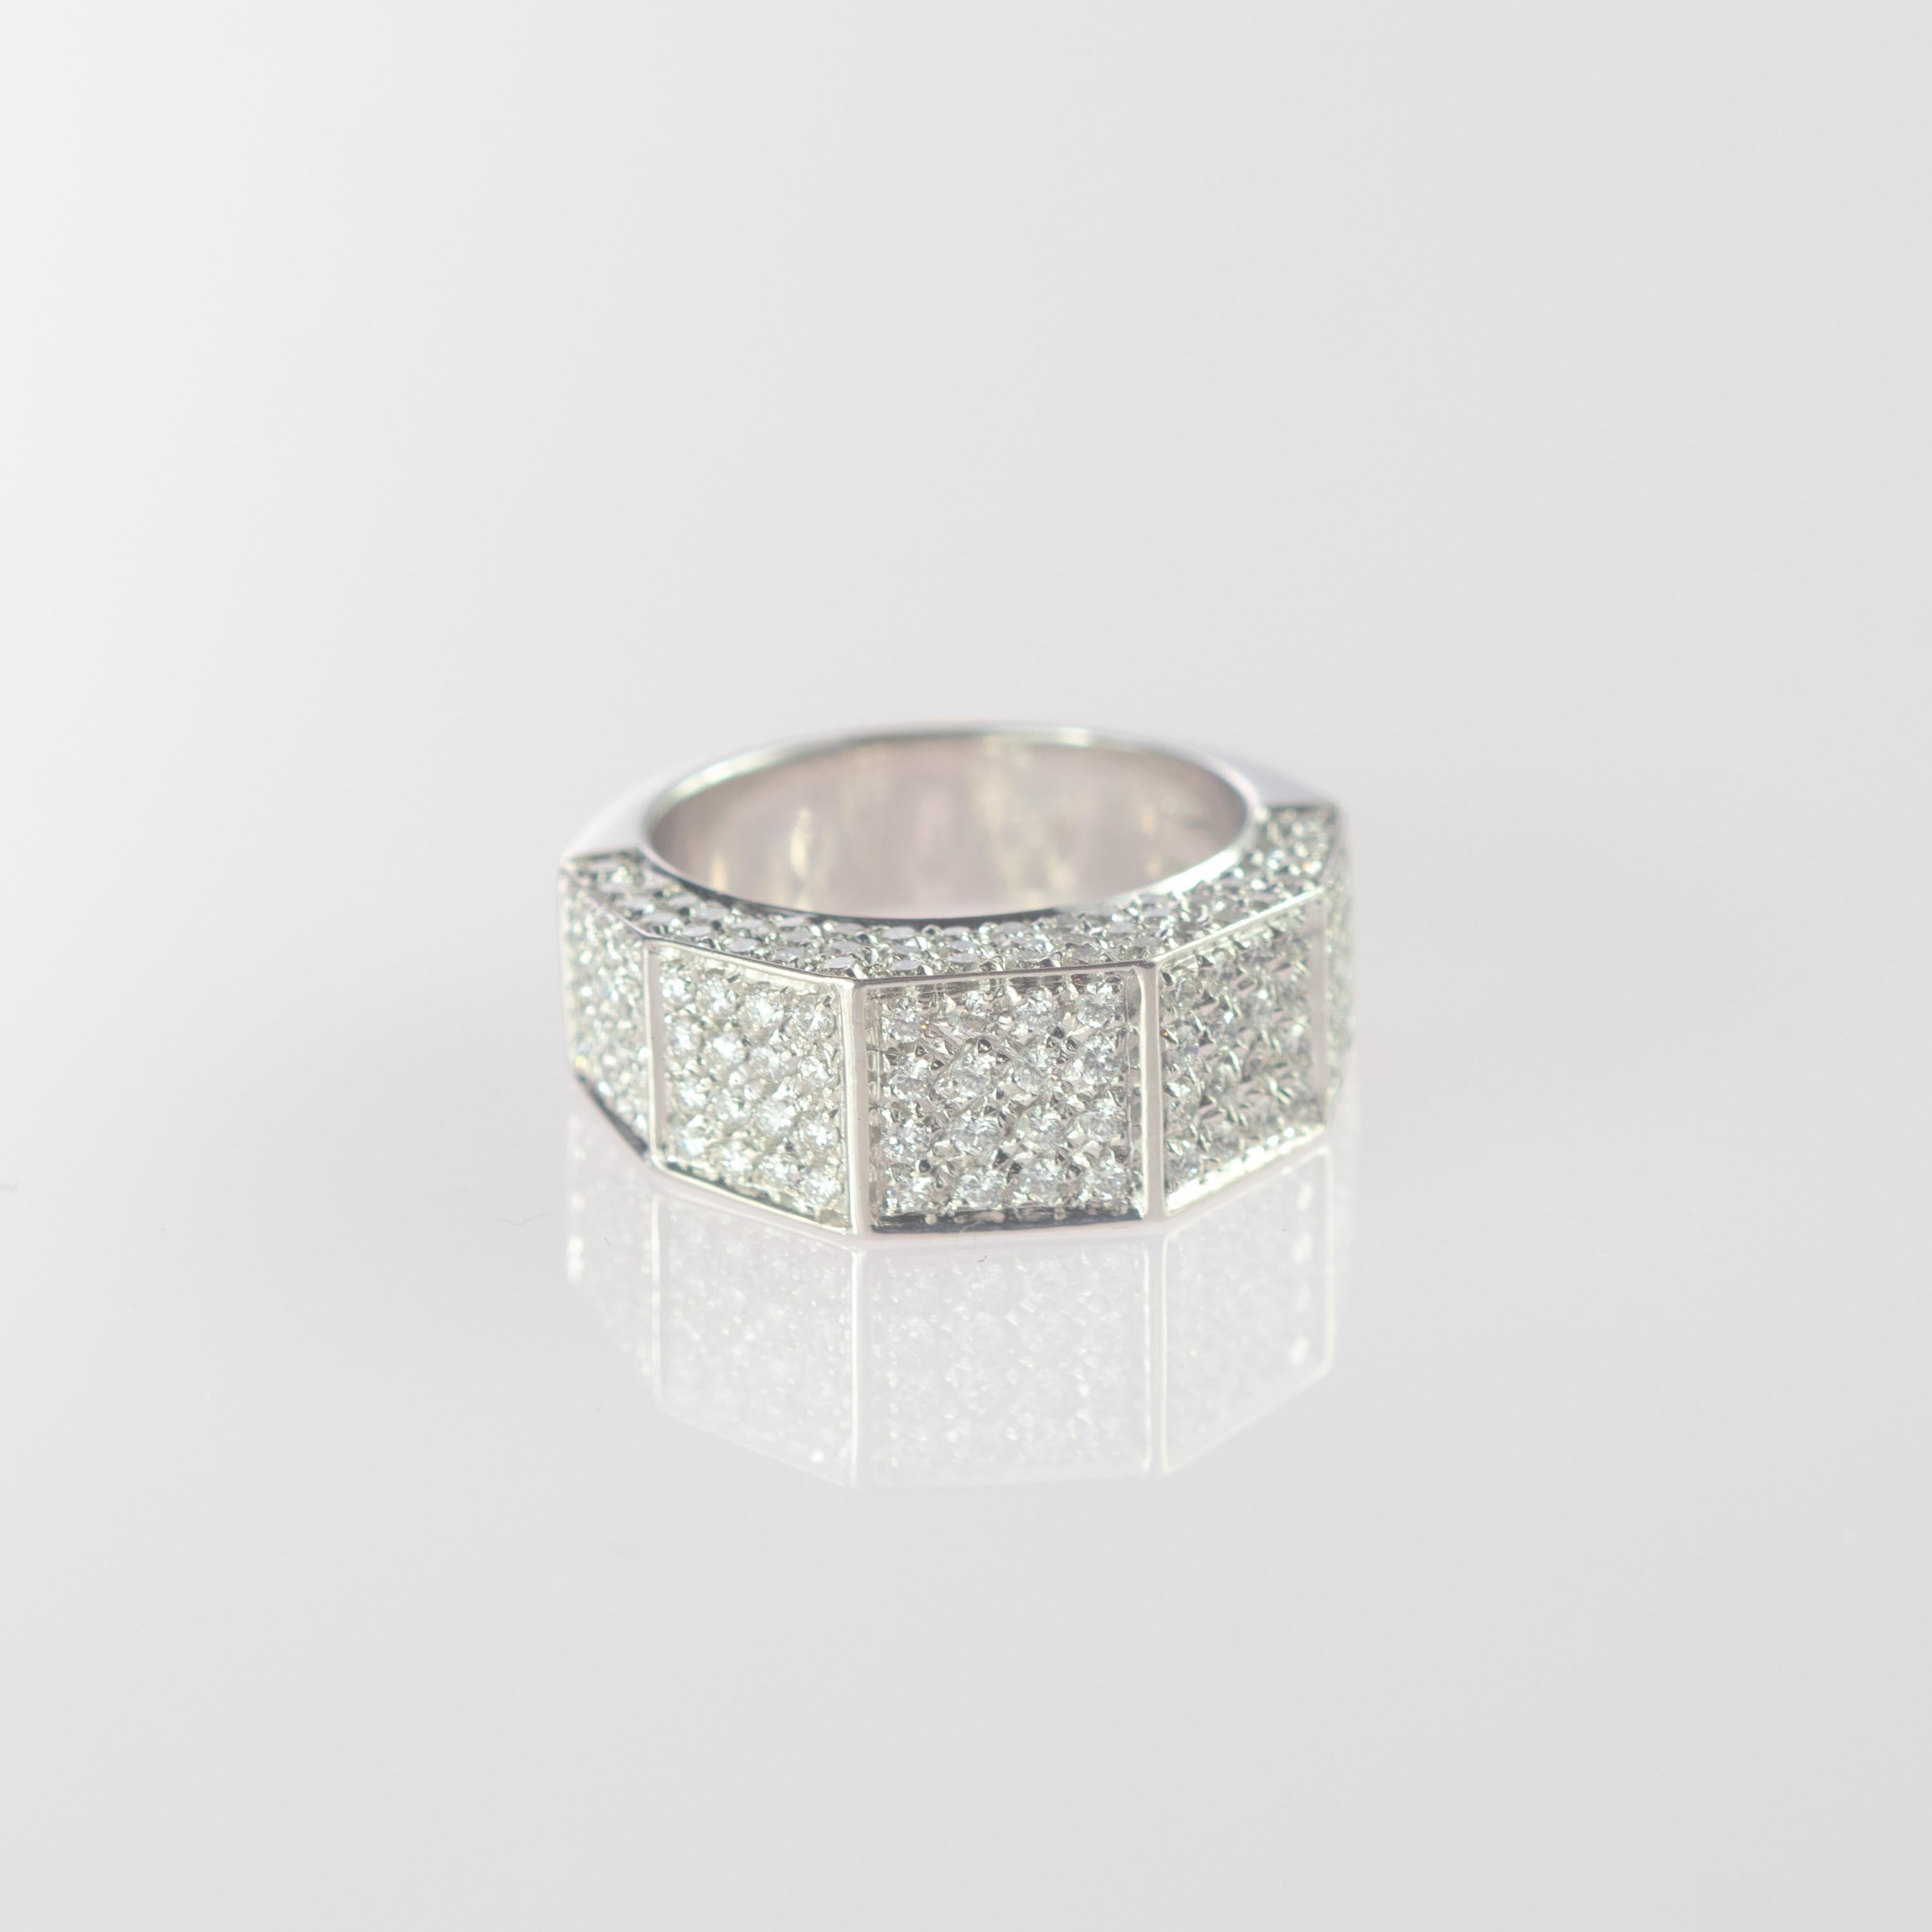 Contemporary Intini Jewels 1.57 Carat Diamond Cluster 18 Karat White Gold Band Cocktail Ring For Sale